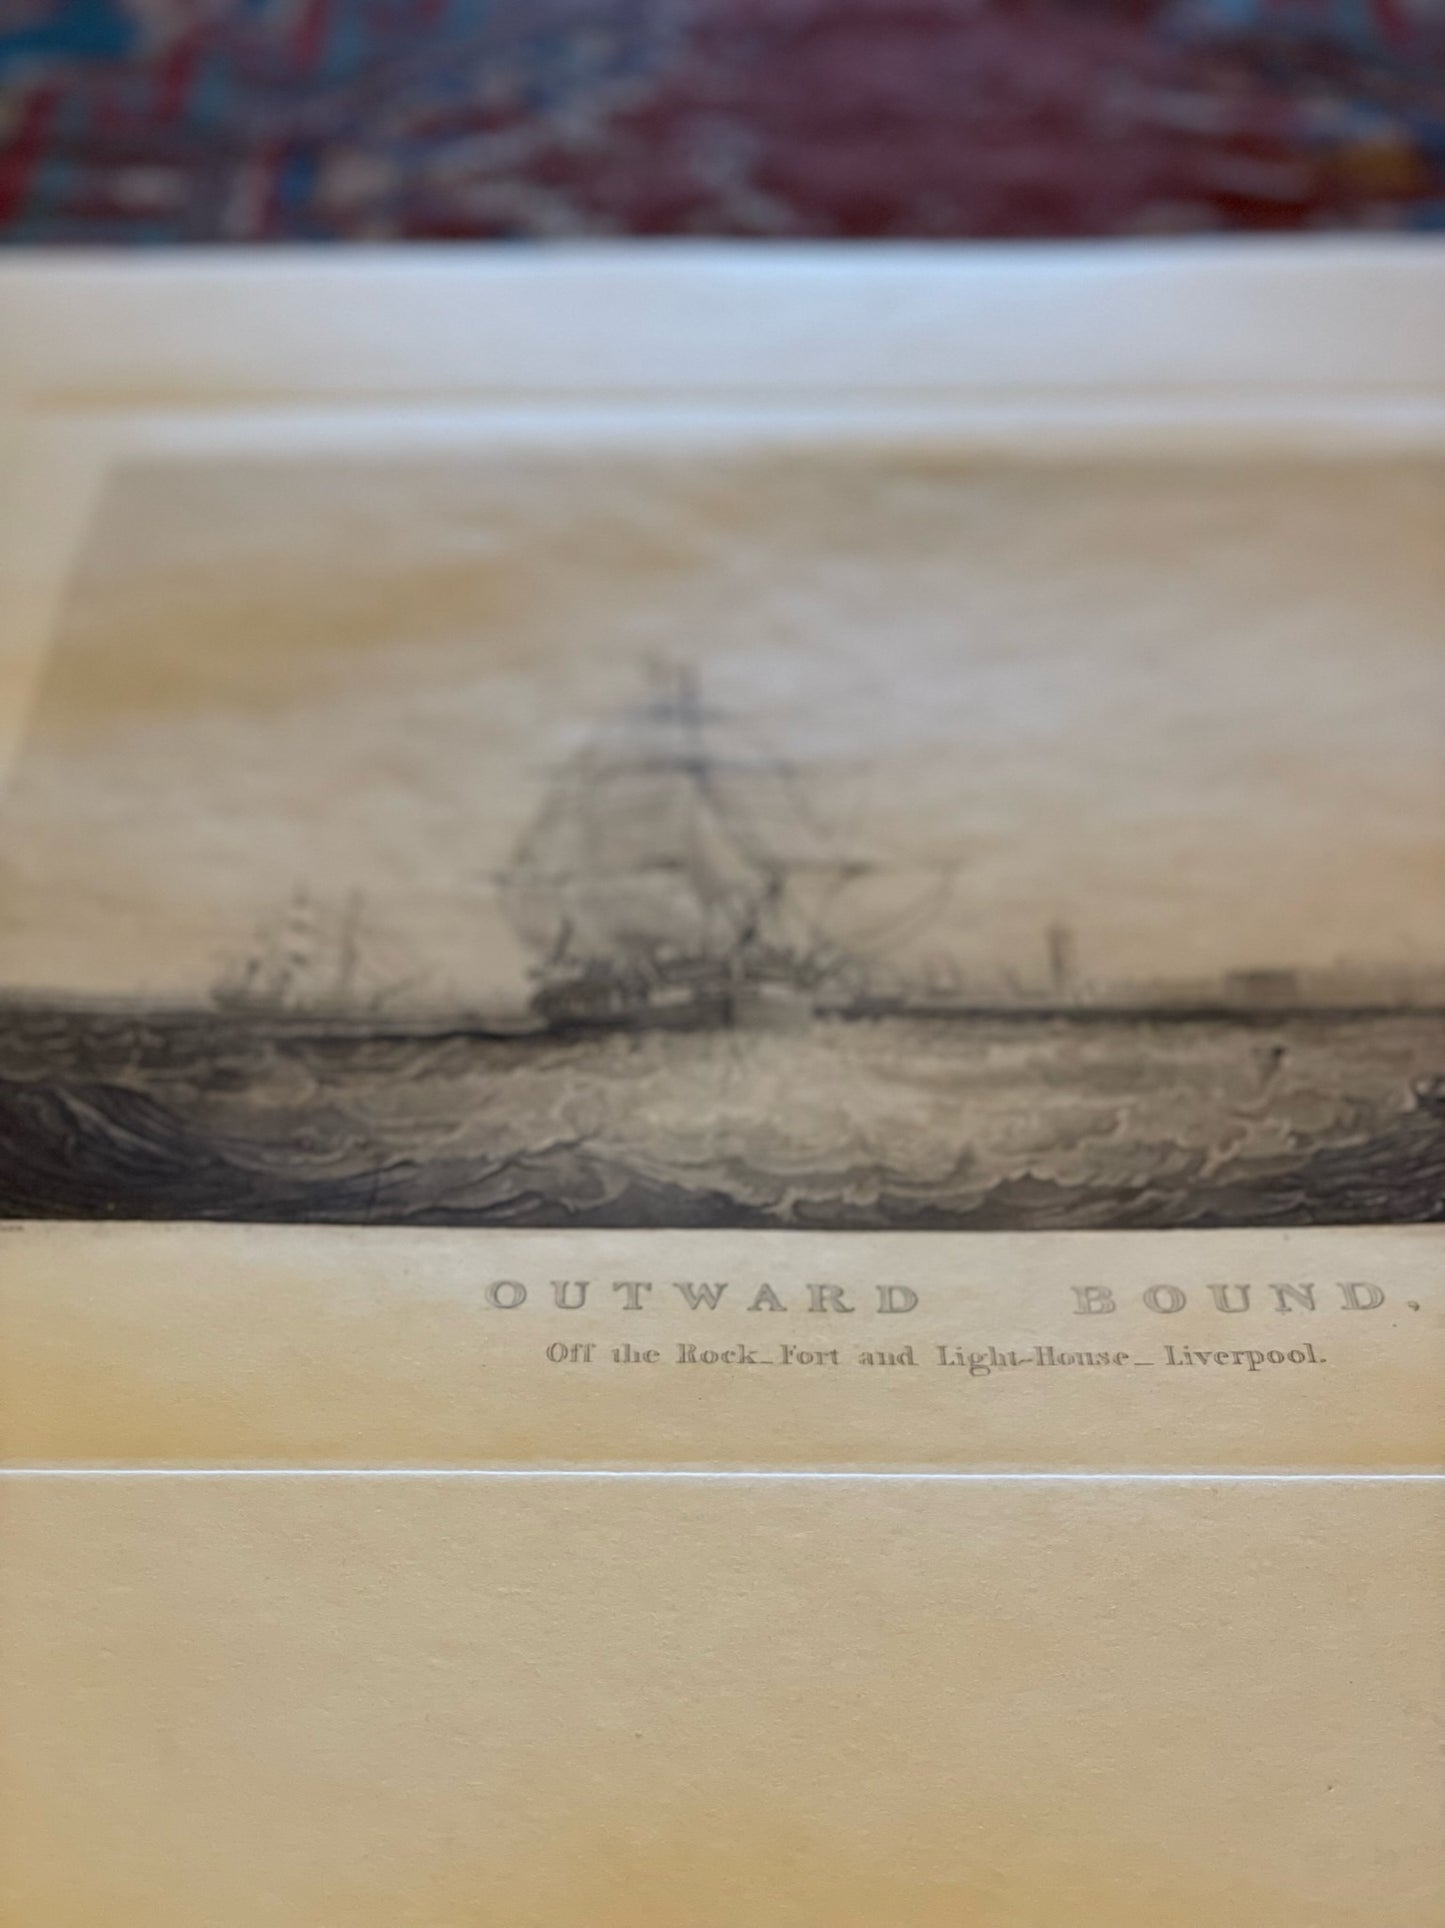 Engraving: "Outward Bound" by Samuel H. Walters